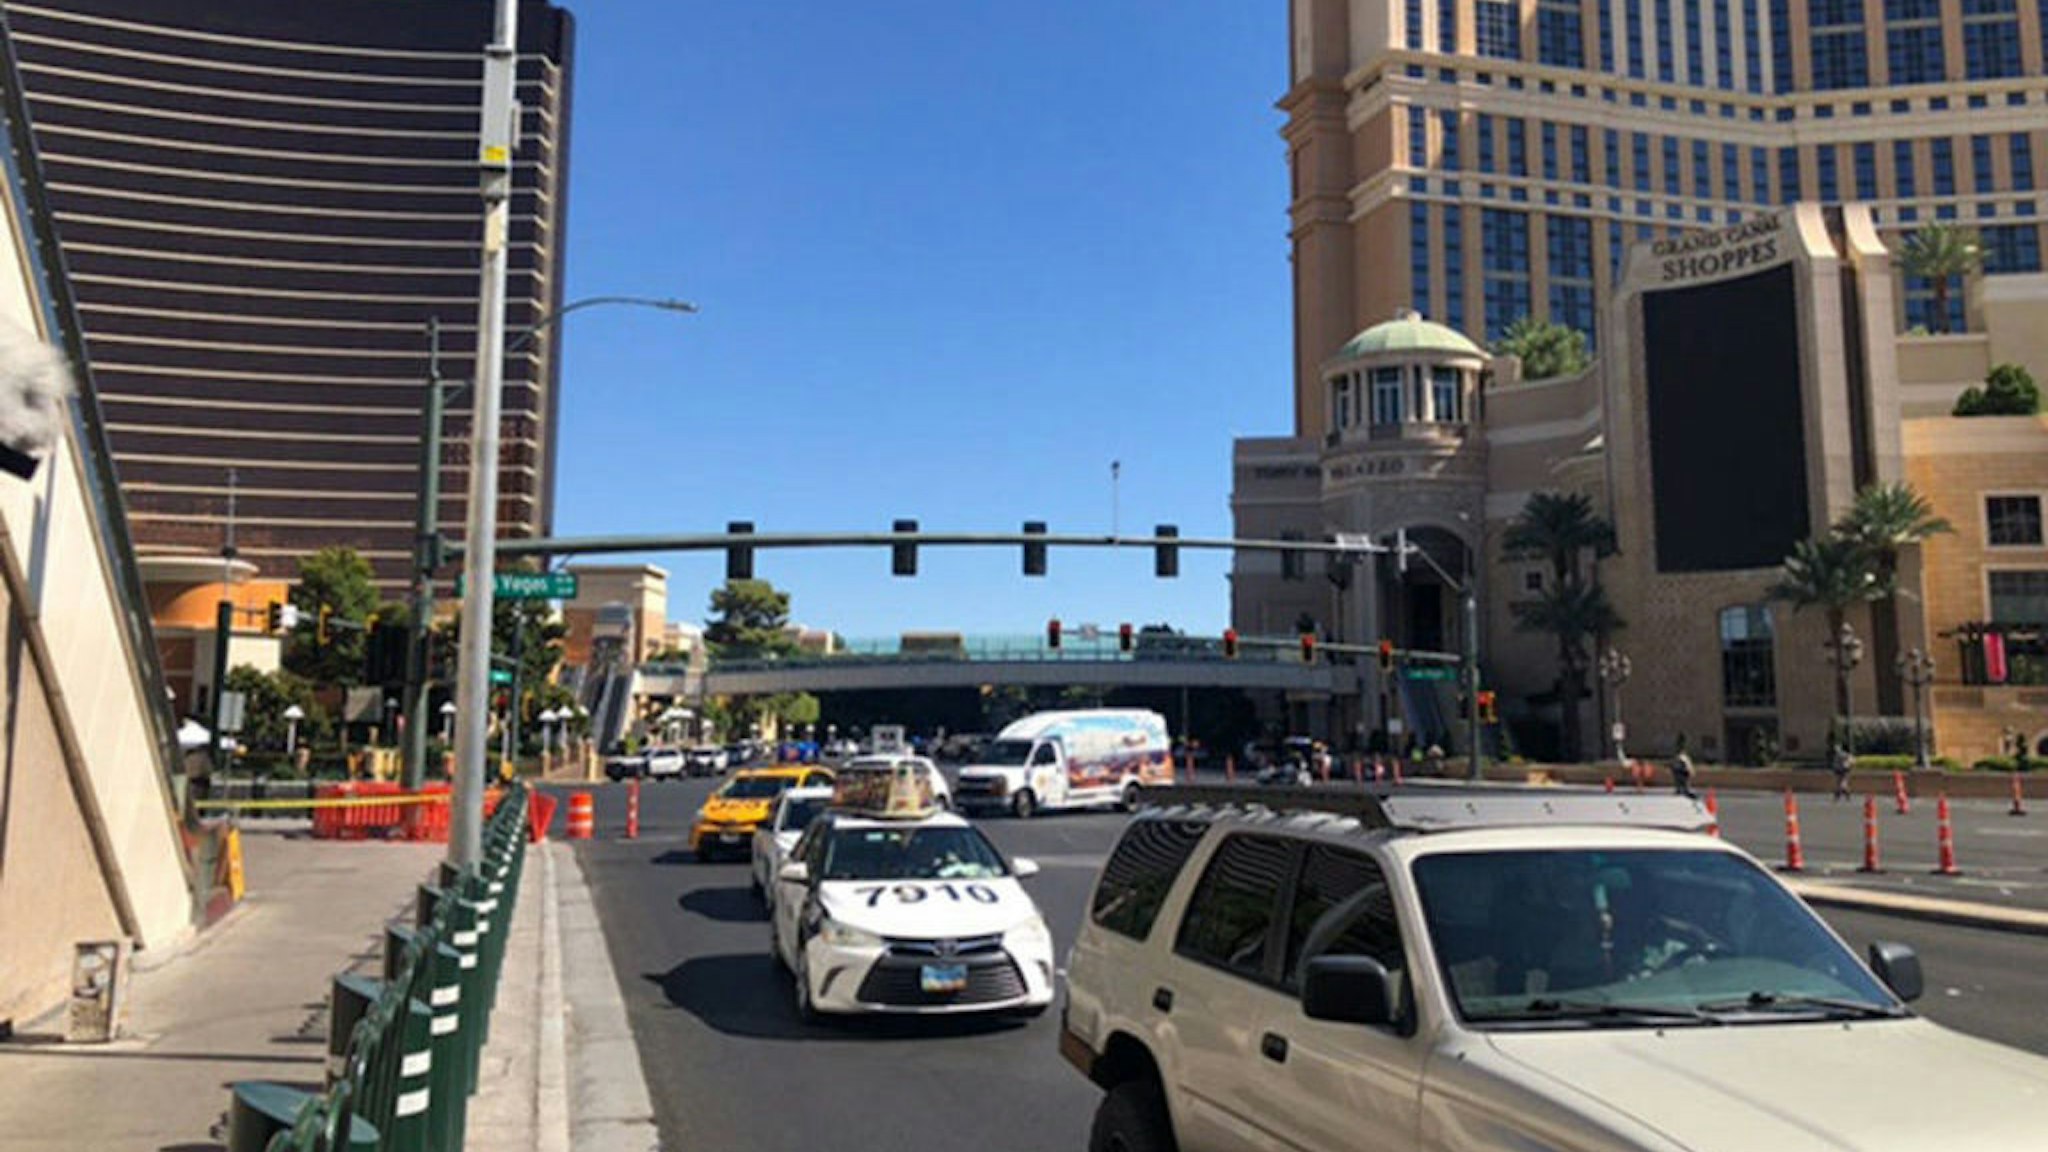 Traffic is shut down at Las Vegas Boulevard South by Sands/Spring Mountain Road as police investigate a deadly stabbing Thursday, Oct. 6, 2022, on the Las Vegas Strip. (James Schaeffer/Las Vegas Review-Journal/Tribune News Service via Getty Images)